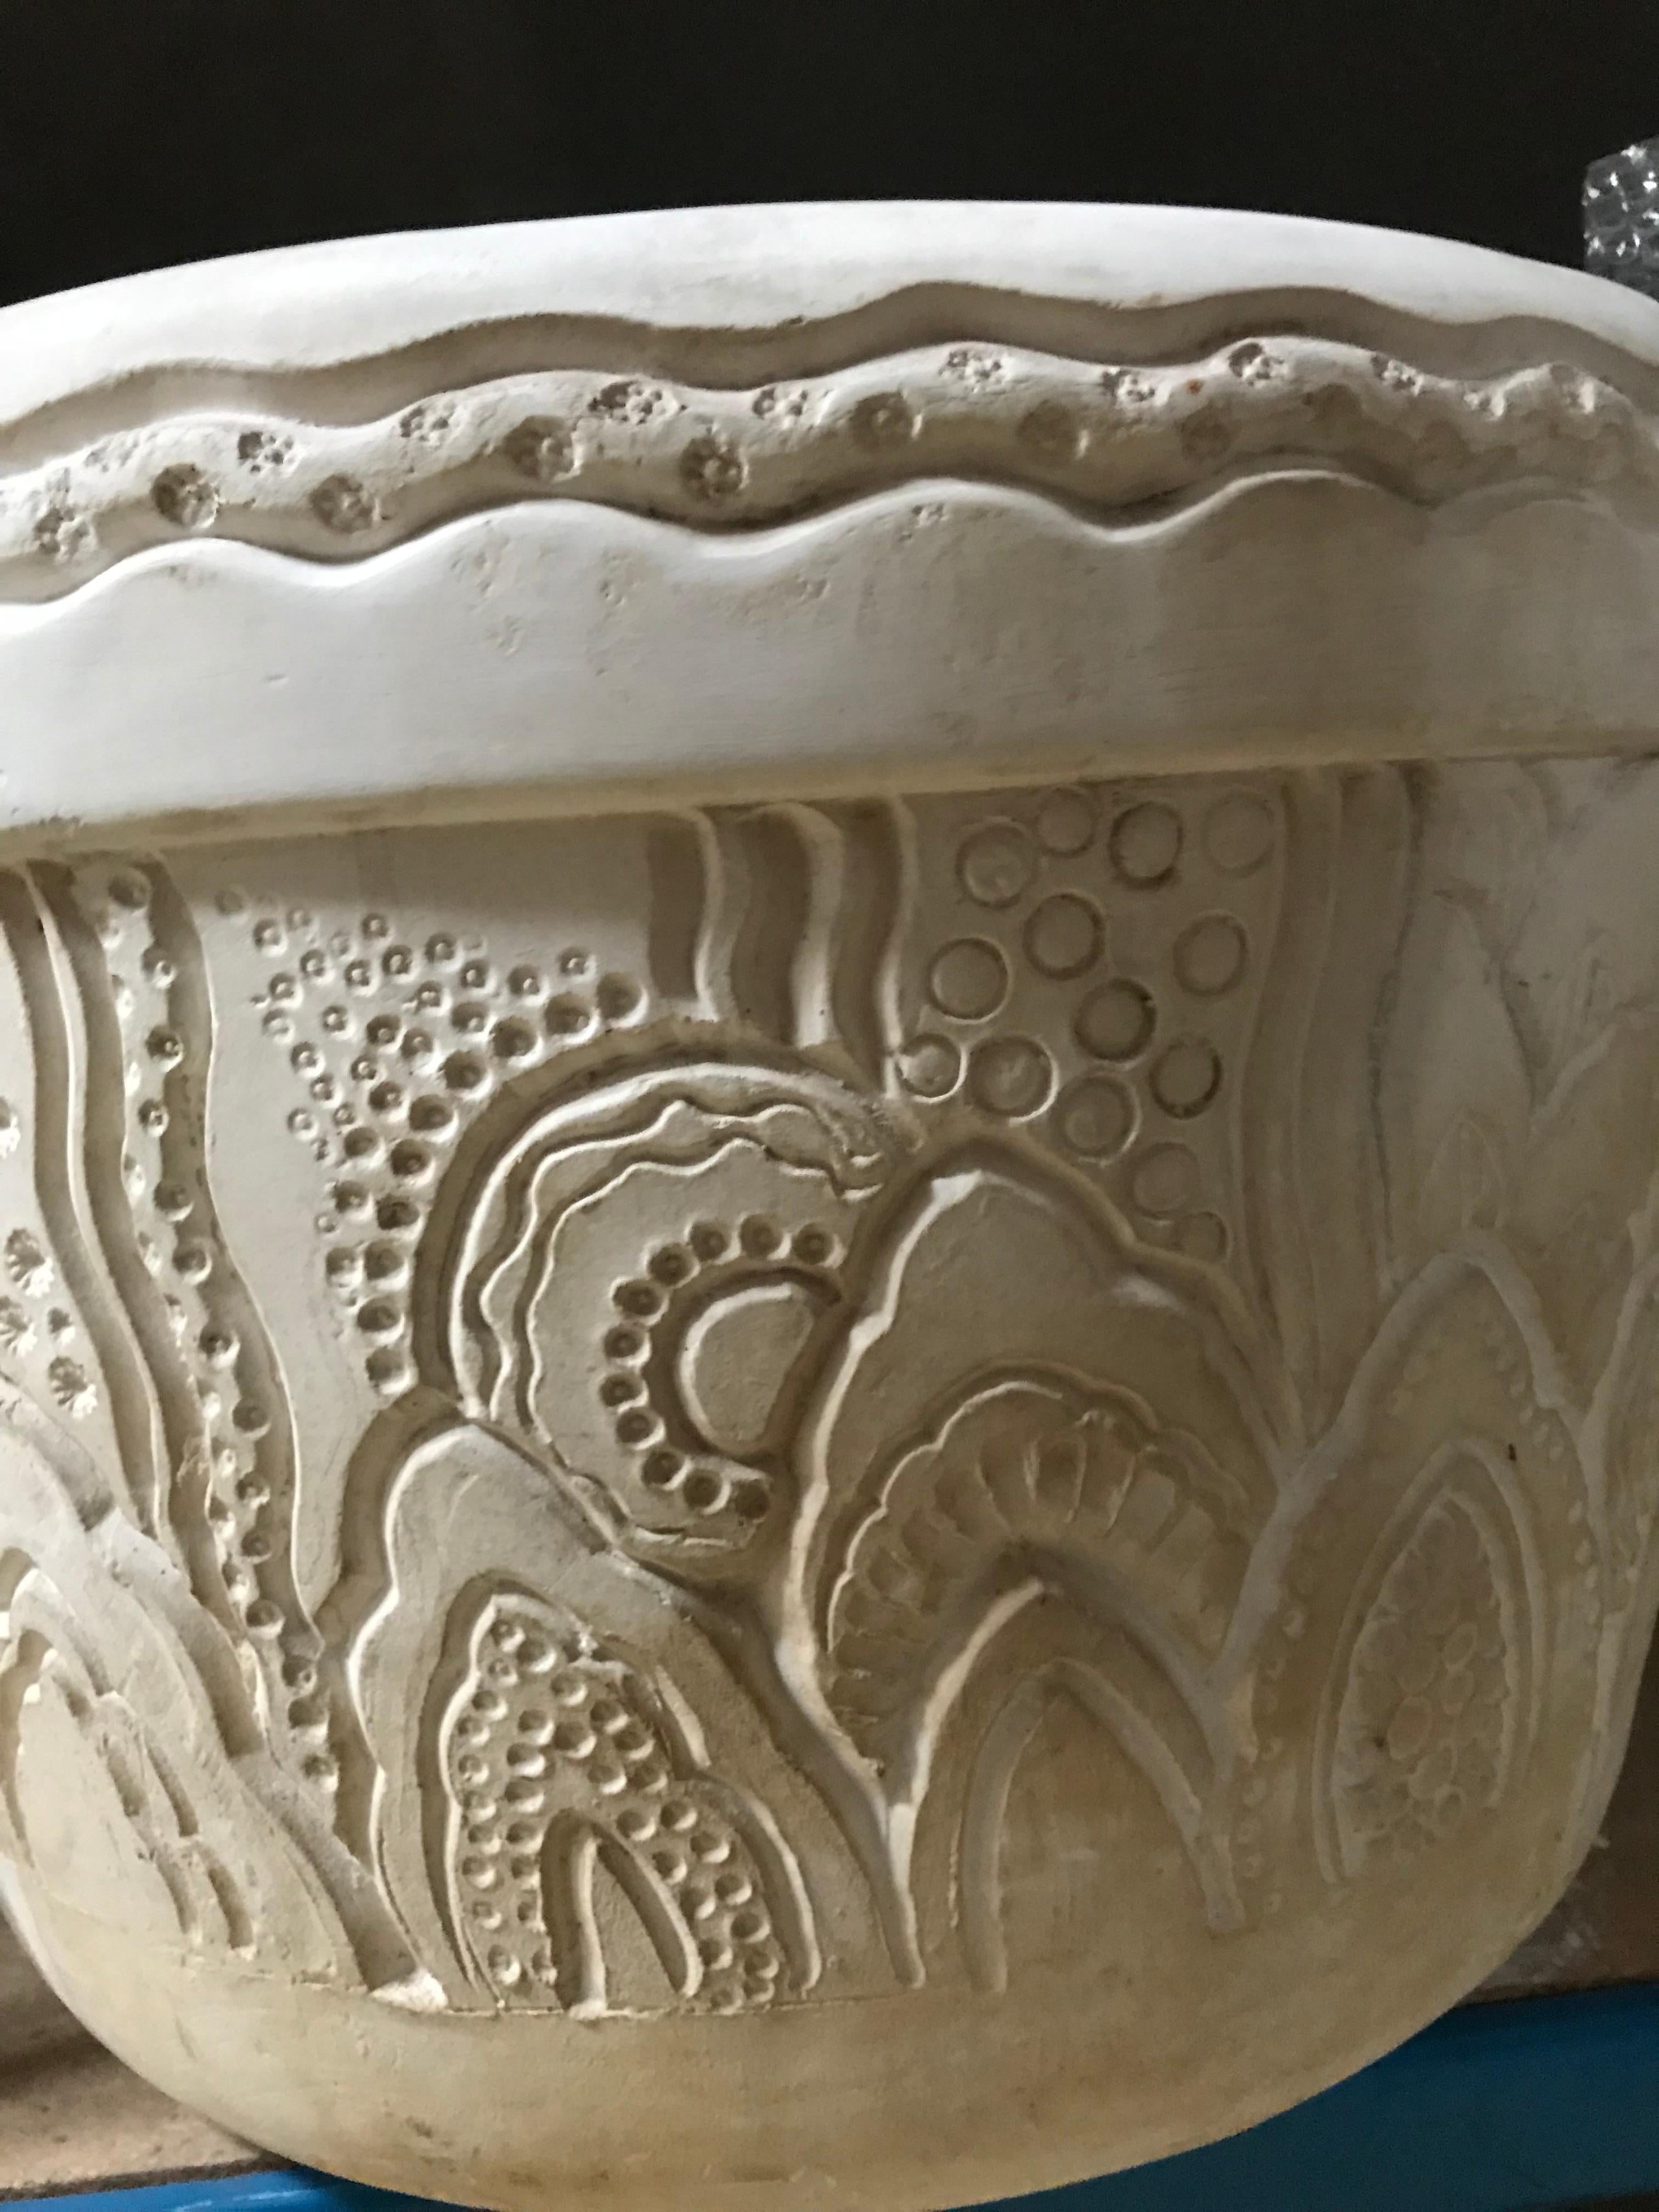 Rare pair of two magnificent large flower-pots in plaster with a engraved decor of bubbles, seaweeds and stylized waves. (Stains and loss).
Signed on the side.

Provenance : 
- Château de Larnagol
- Collection Raymond Subes